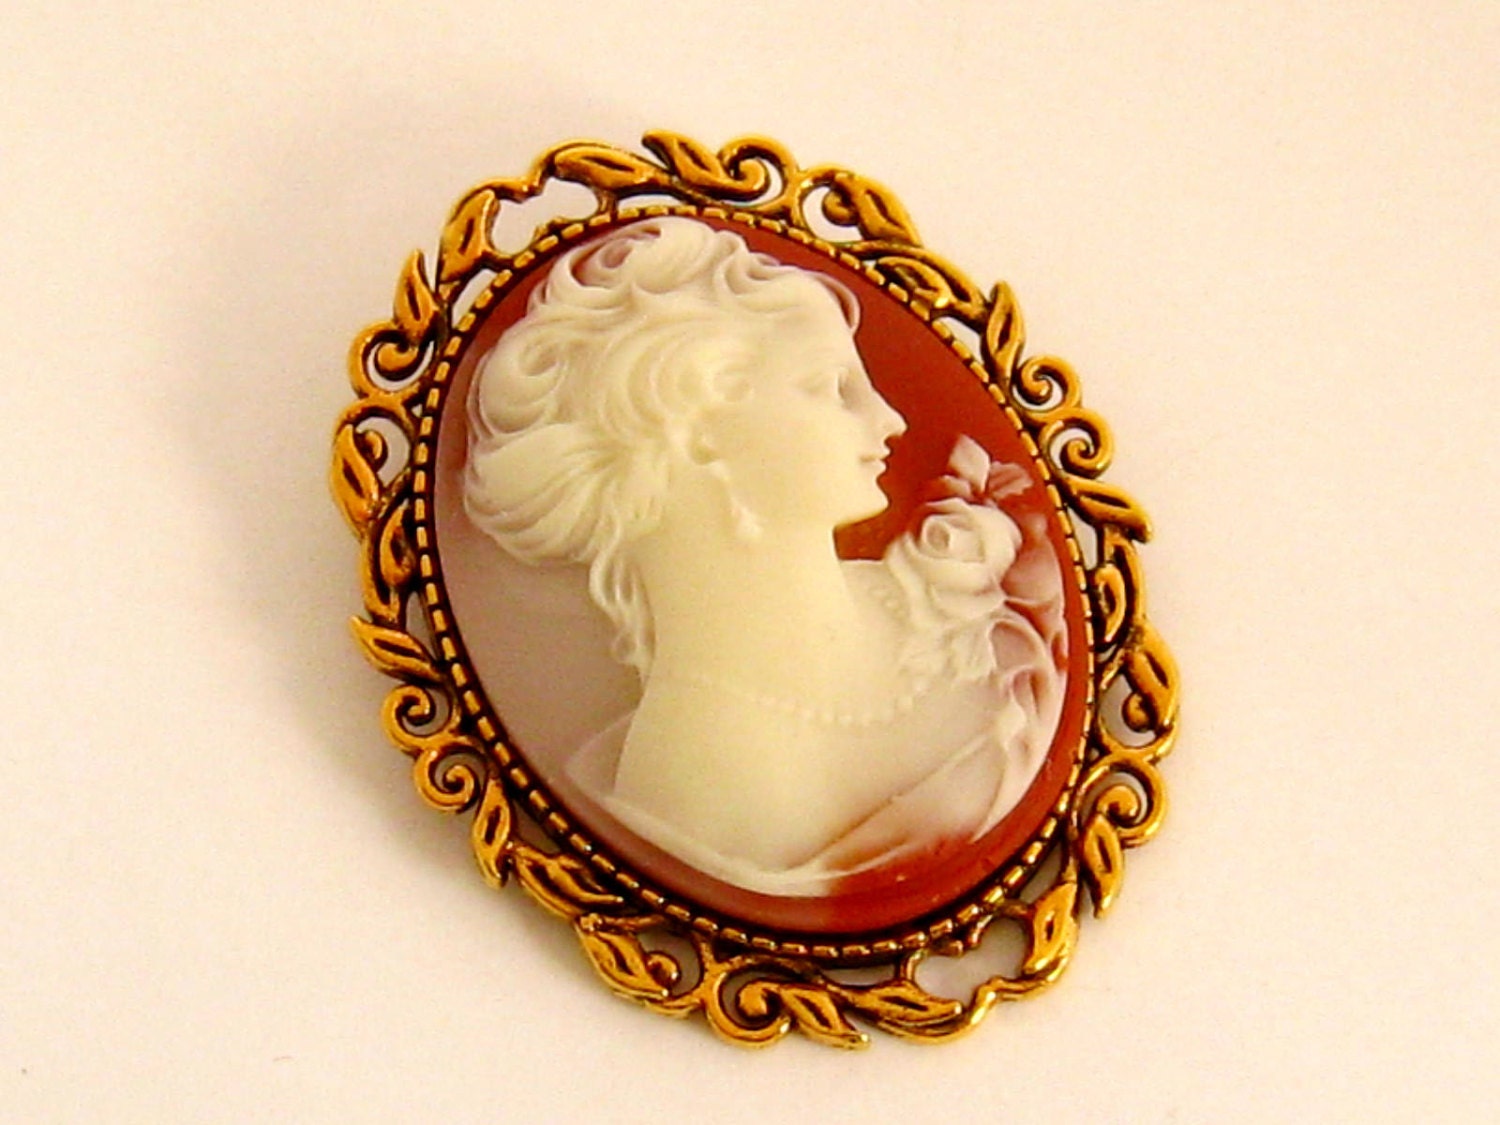 lureme Vintage Elegant Victorian Lady Beauty Cameo with Crystal Brooch Pin  (br000017)